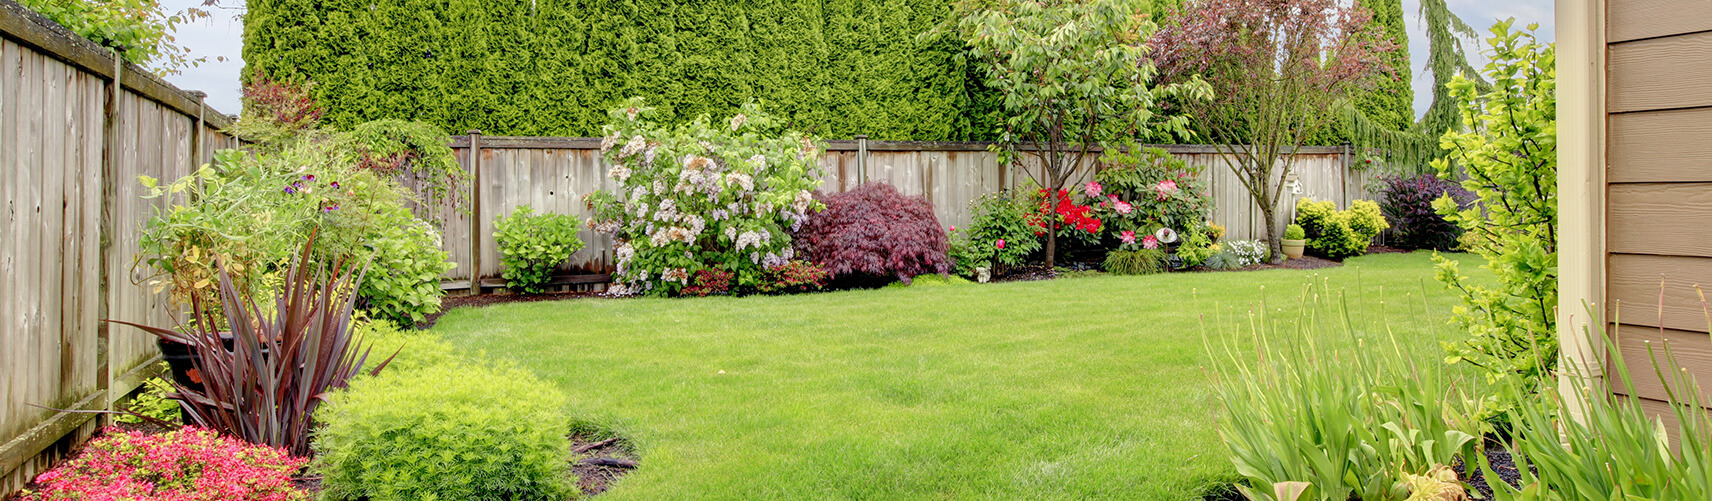 Tipton Lawn Care Services, Landscaping Services and Snow Removal